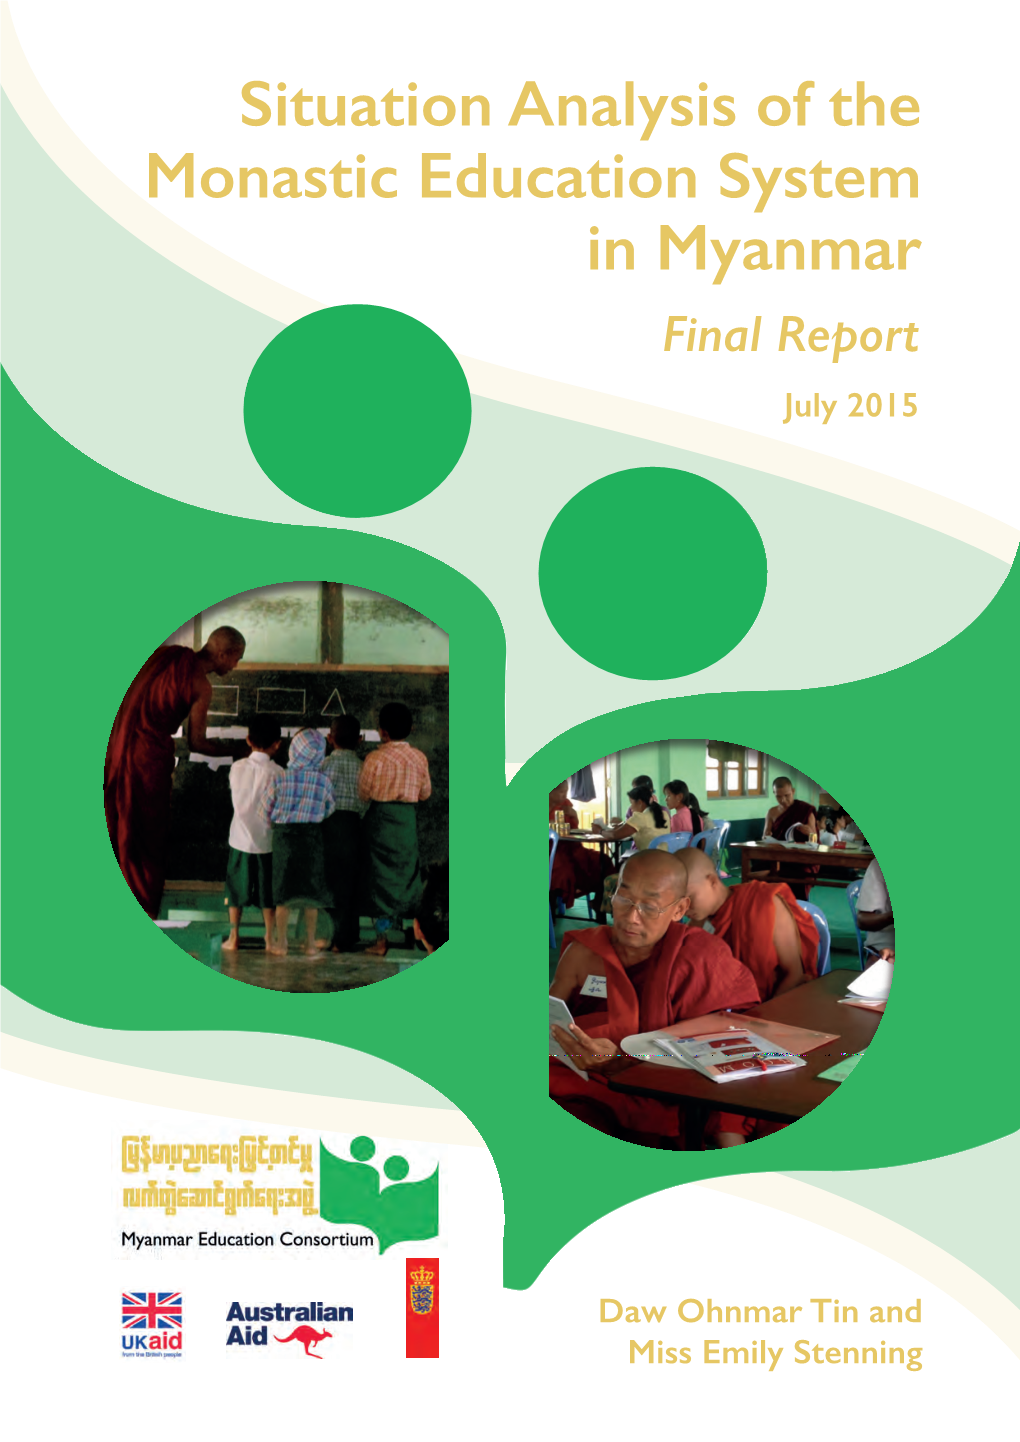 Situation Analysis of the Monastic Education System in Myanmar Final Report July 2015